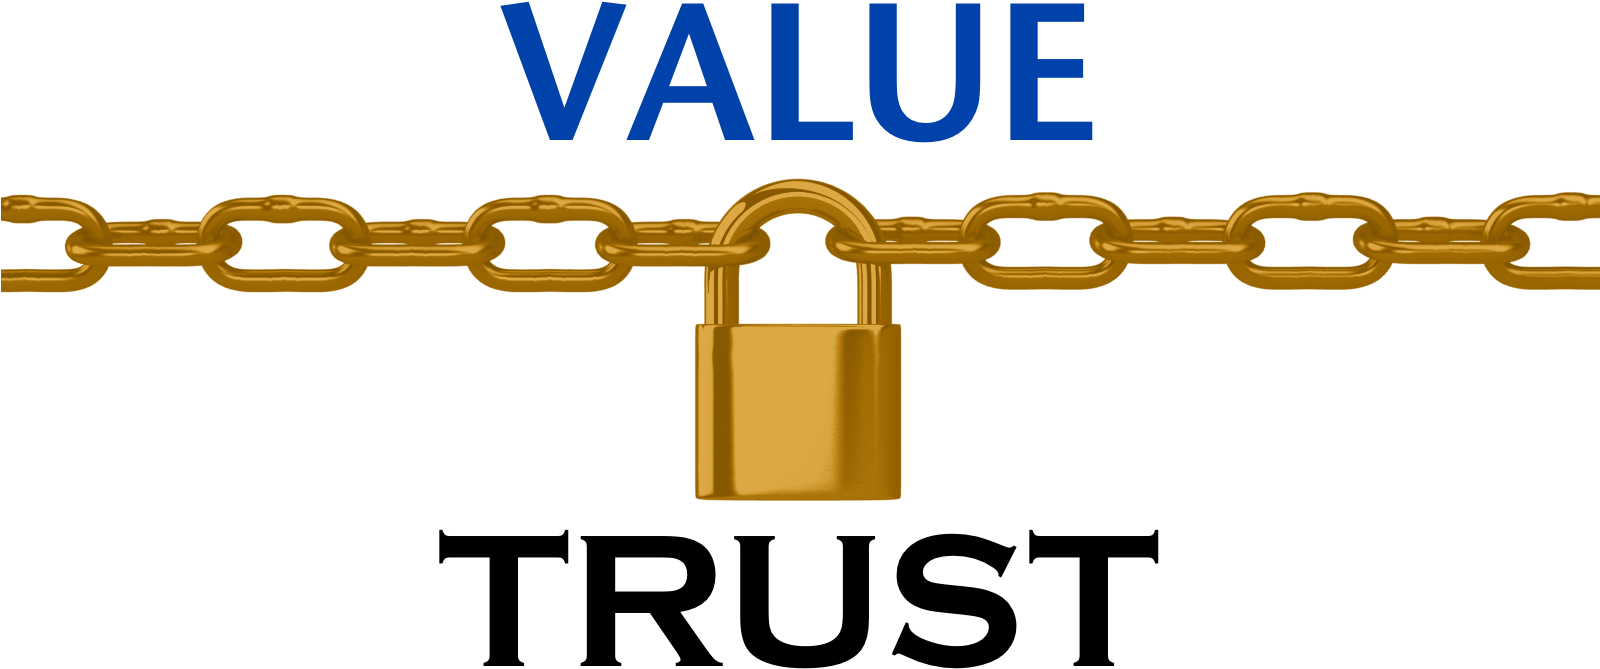 Value Trust Chain Lock Concept PNG